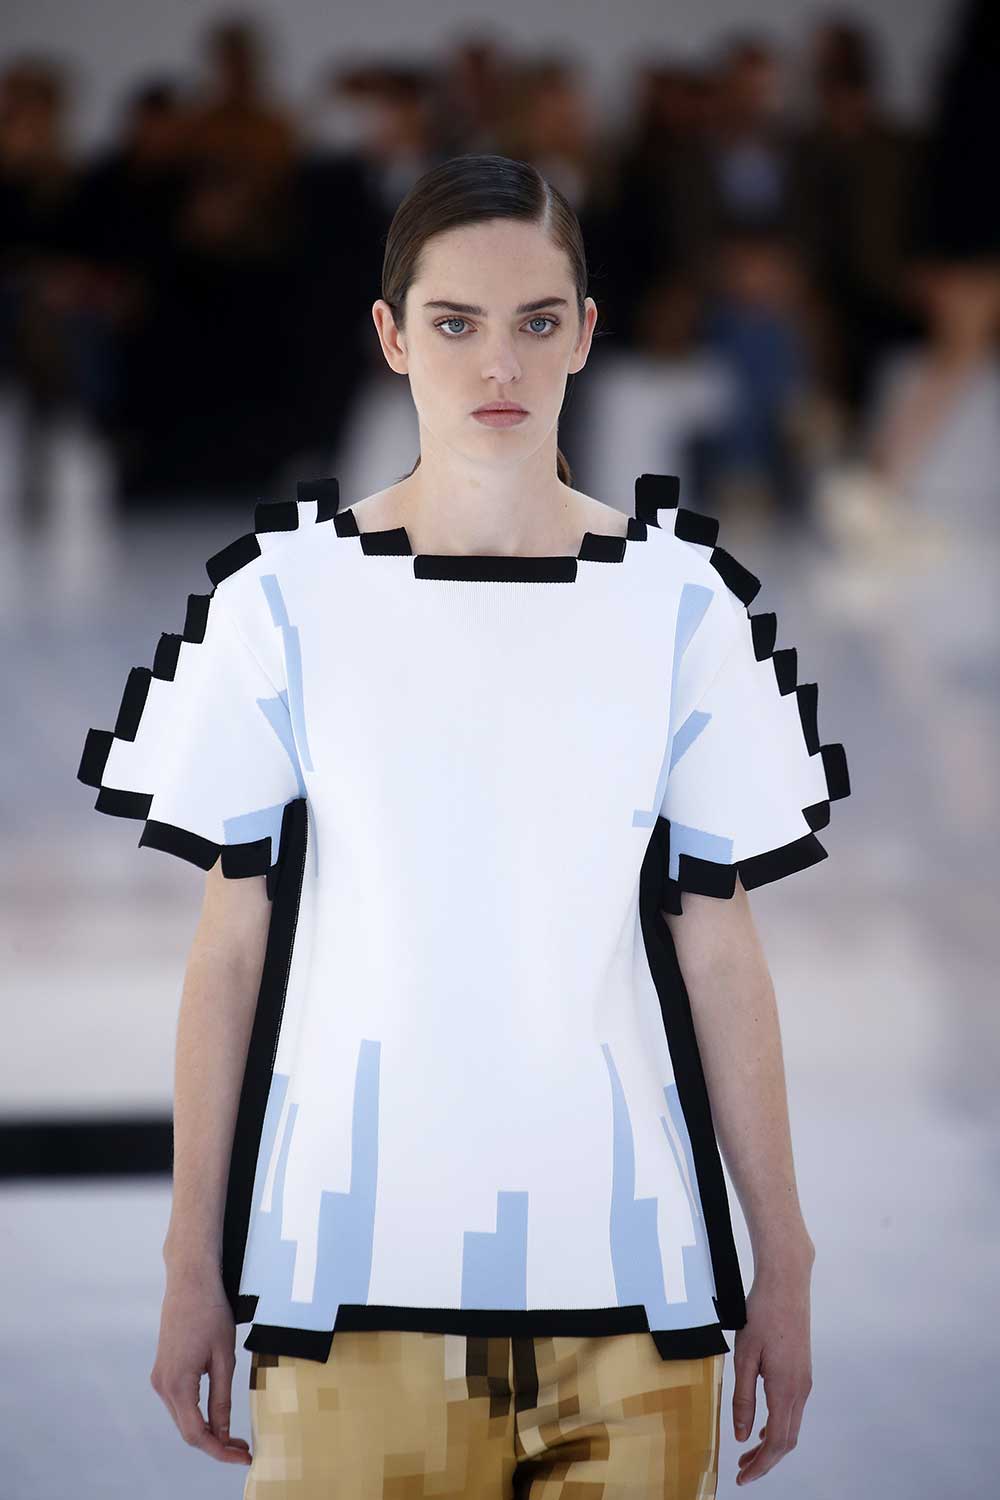 LOEWE's Pixelized SS23 Hoodie Looks Like 'Minecraft' Clothes